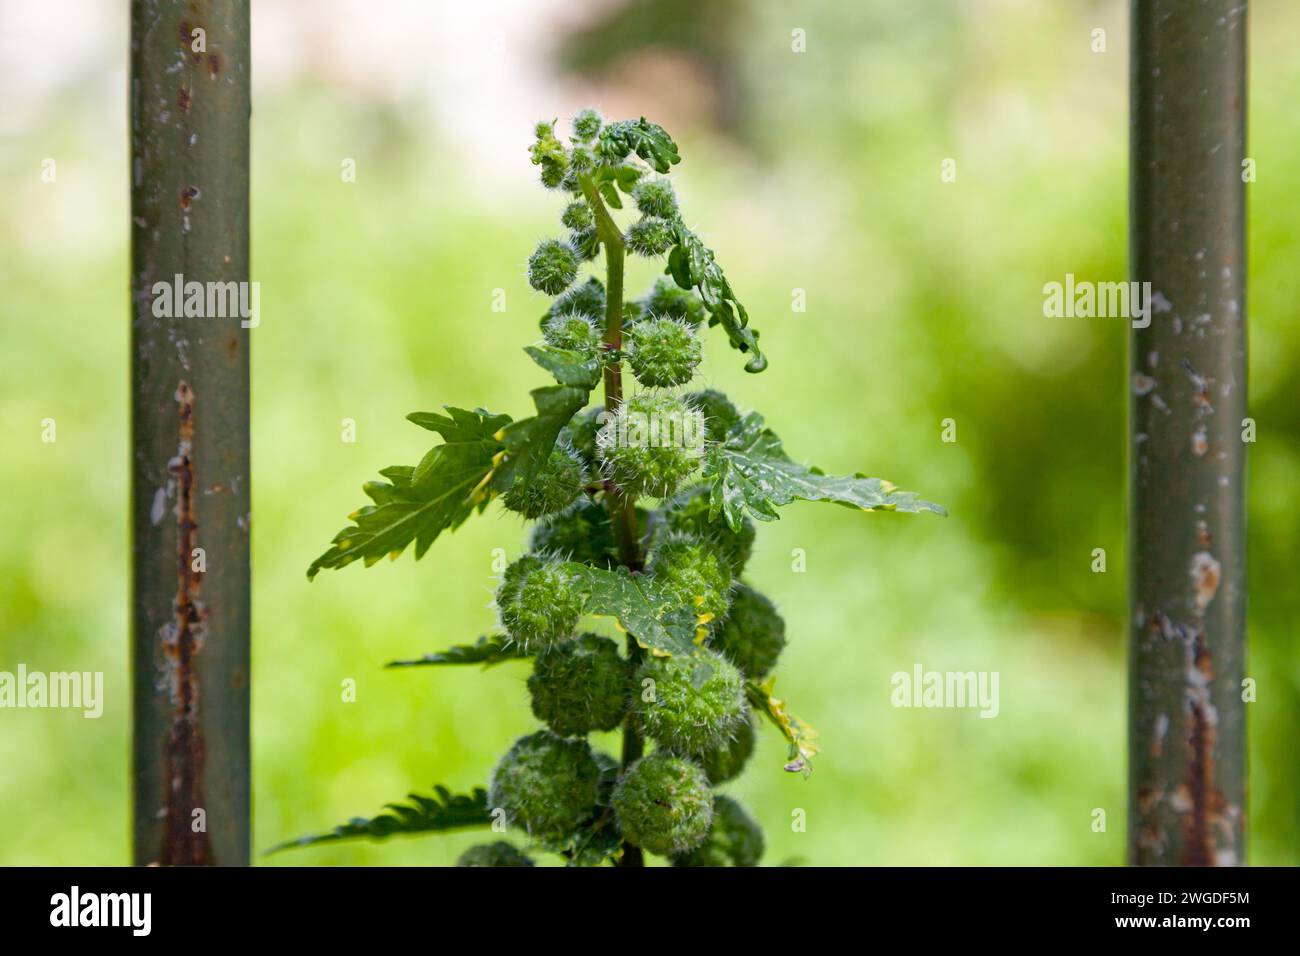 Close-up on a Roman nettle (Urtica pilulifera), a herbaceous annual flowering plant in the family Urticaceae. Stock Photo